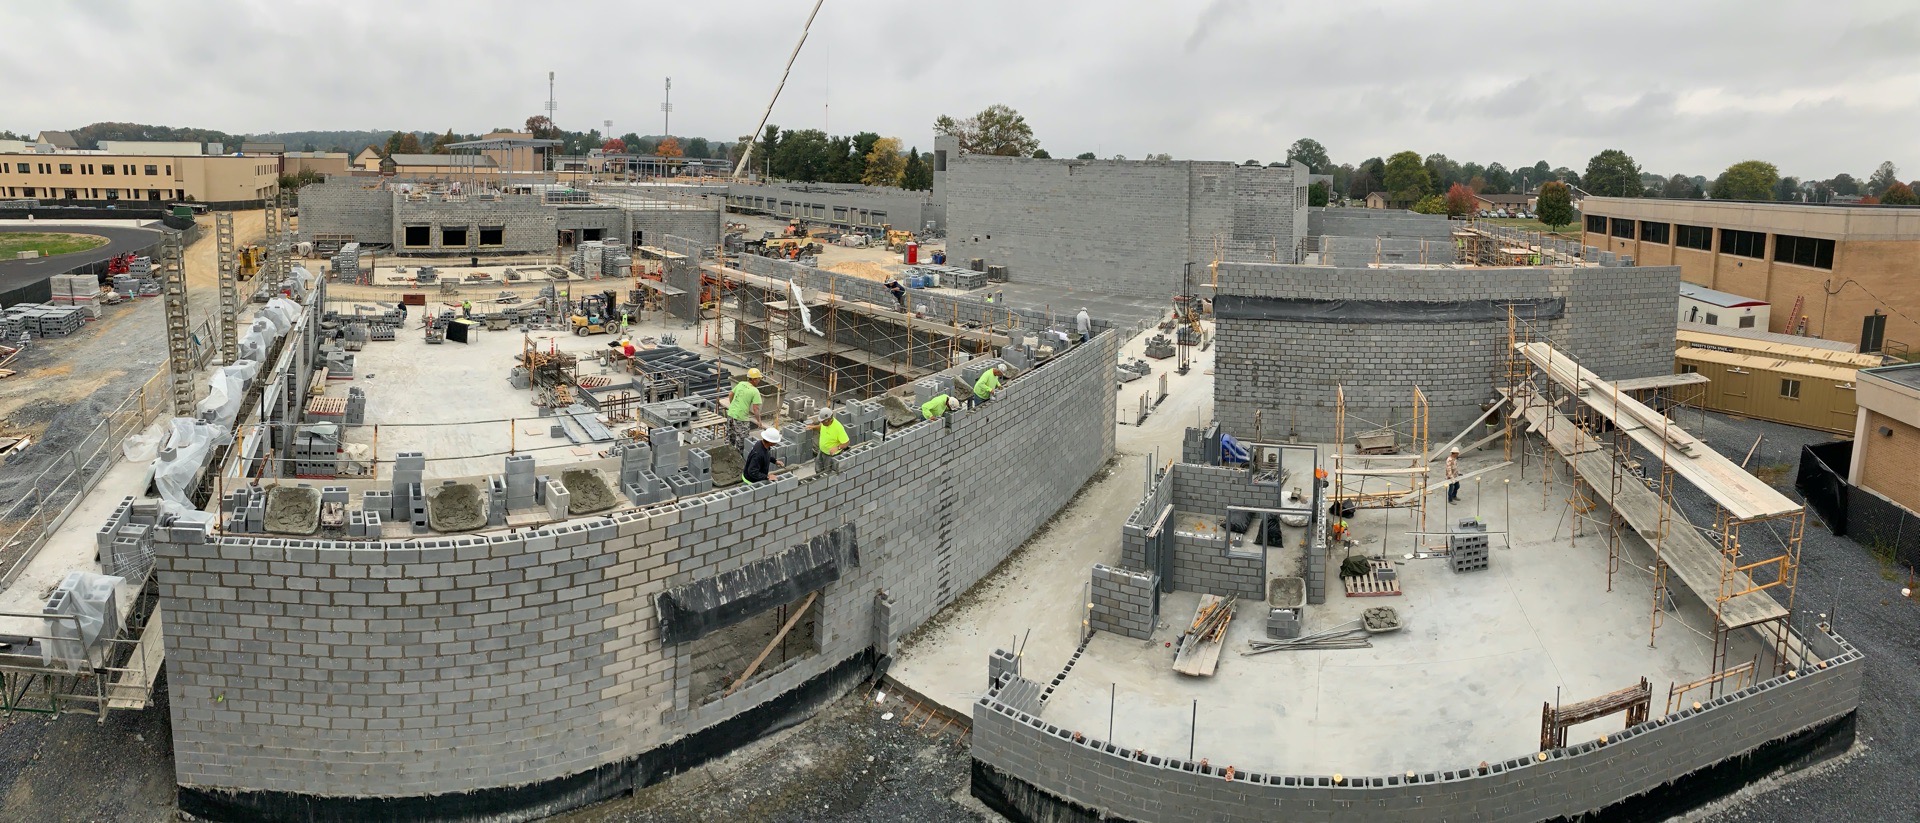 Middle School Construction Site - October 16, 2019